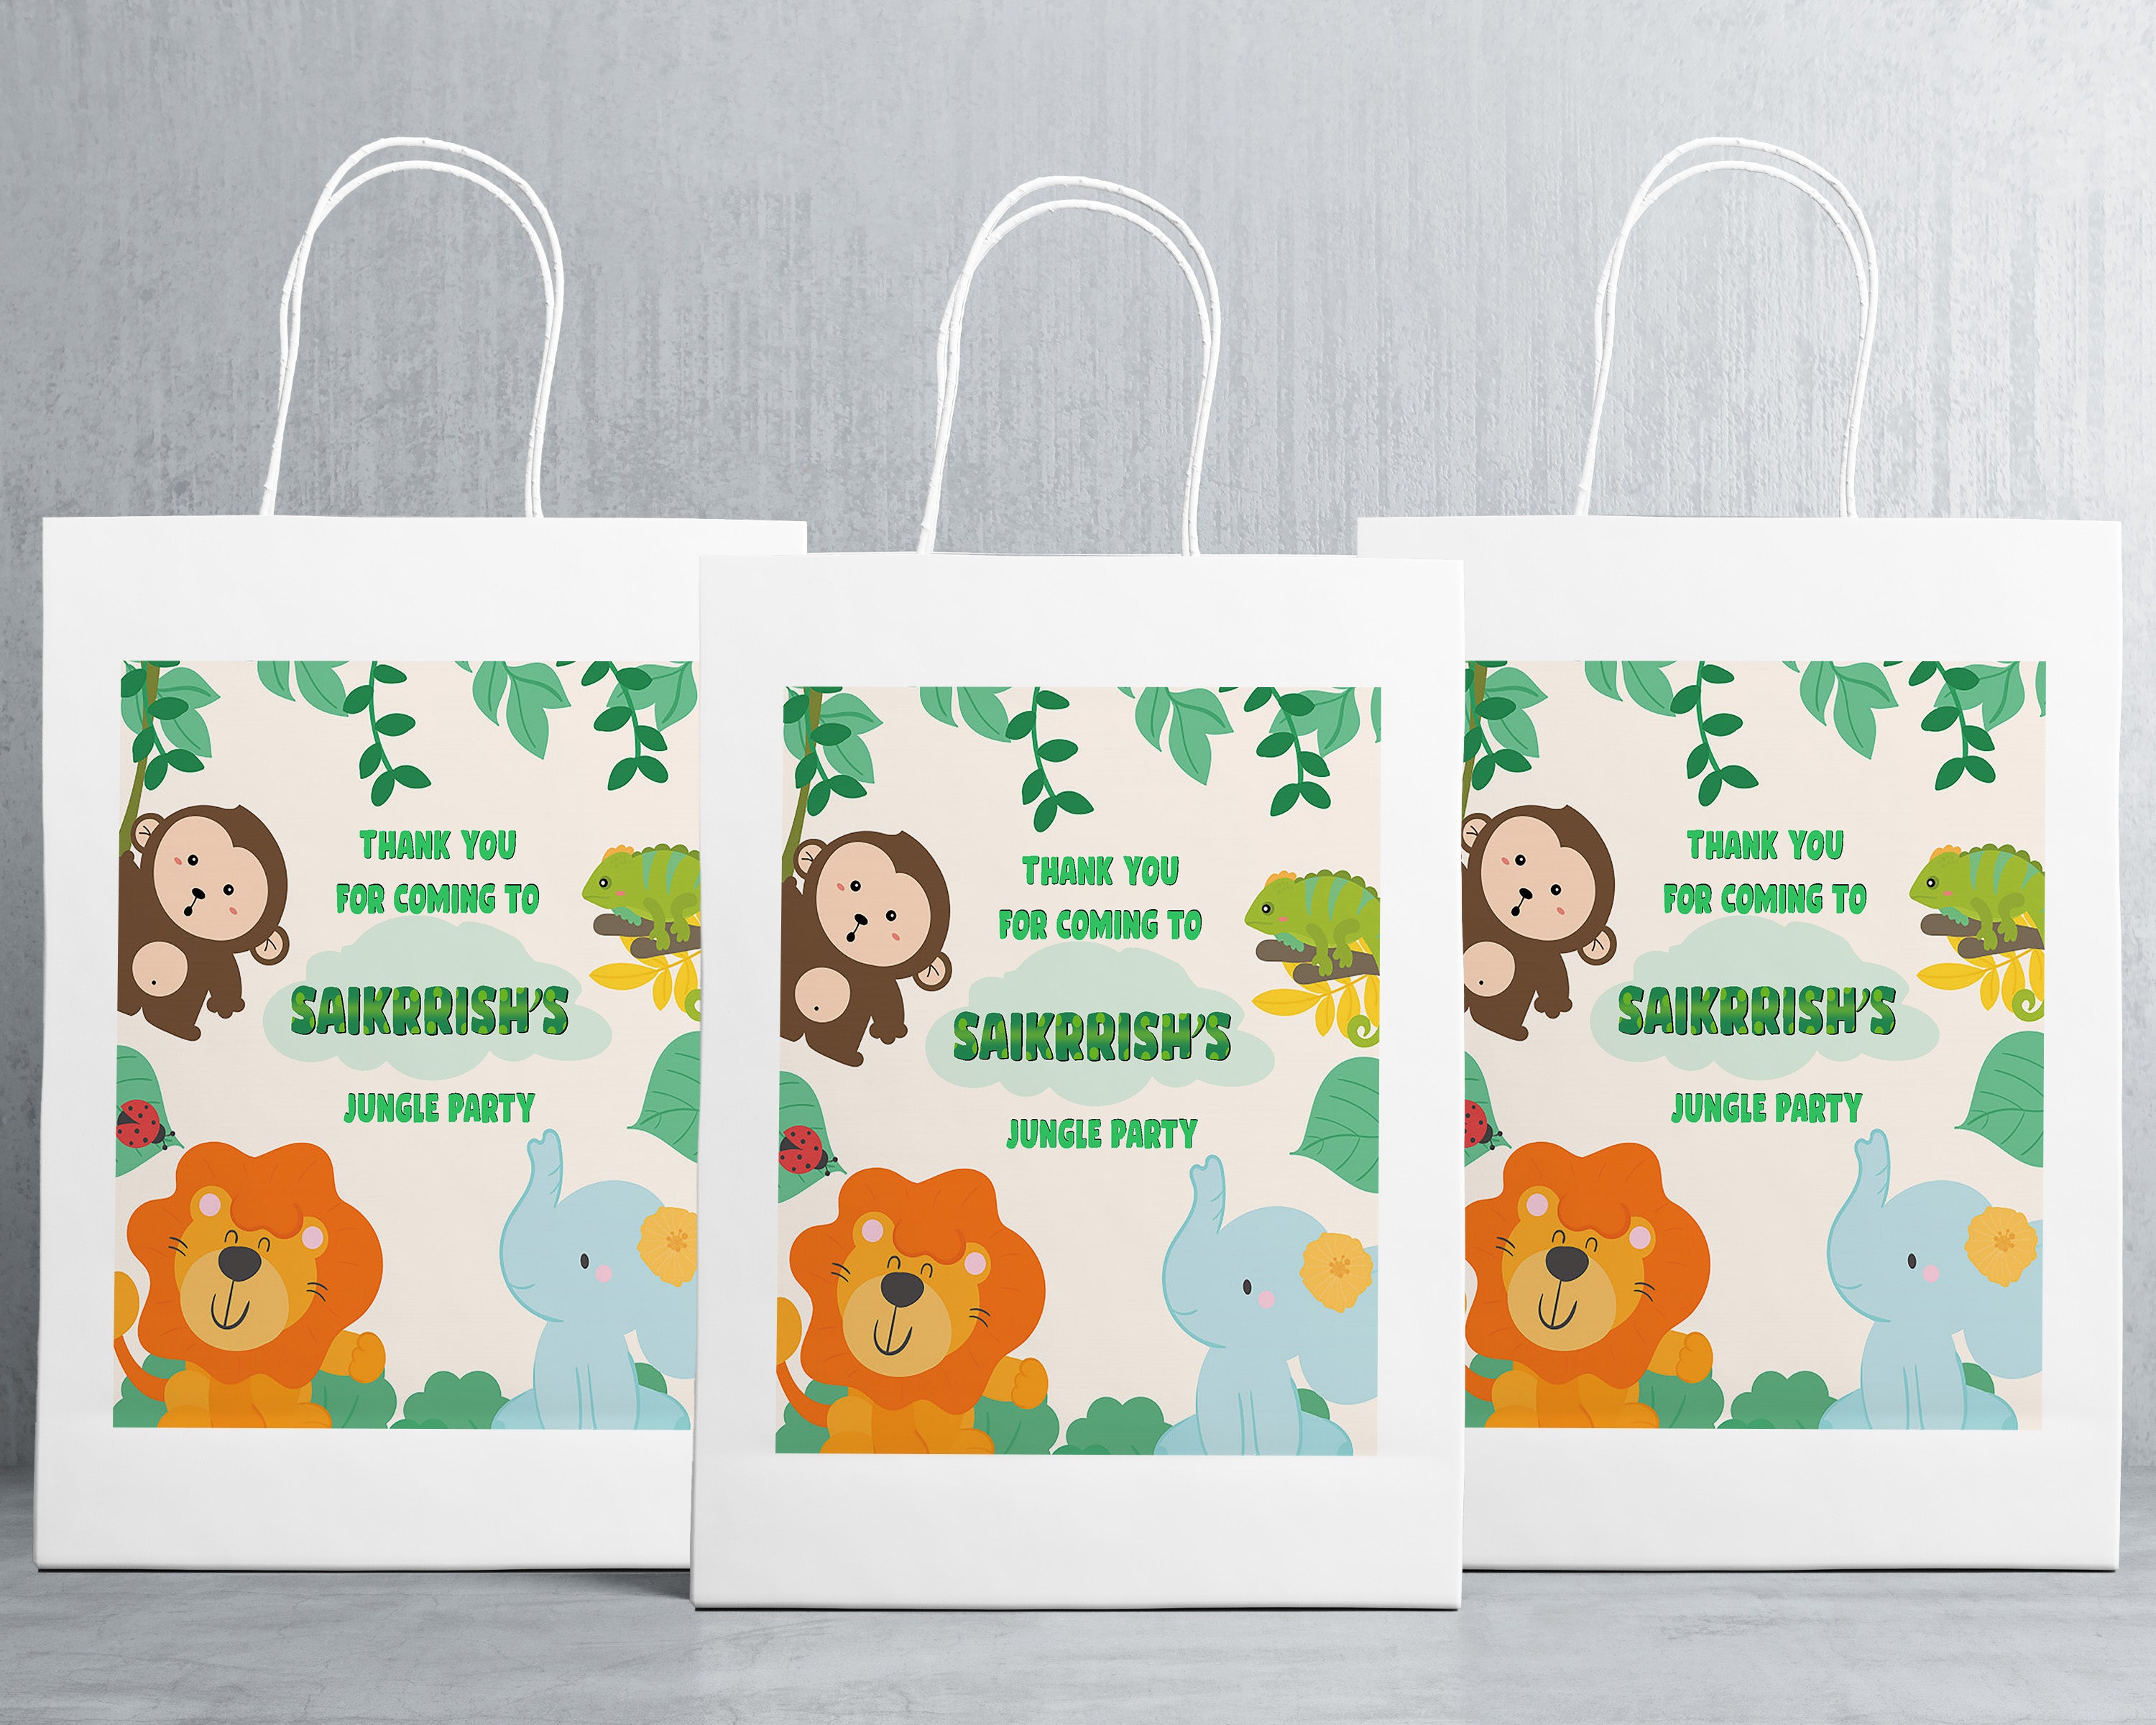 Pack of 6 Animal Theme Lunch Bags for Jungle Theme Return Gifts for Kids  |Party Favors|Giveaways|Safari Theme |Insulated |for School, Office, Picnic  : Amazon.in: Toys & Games